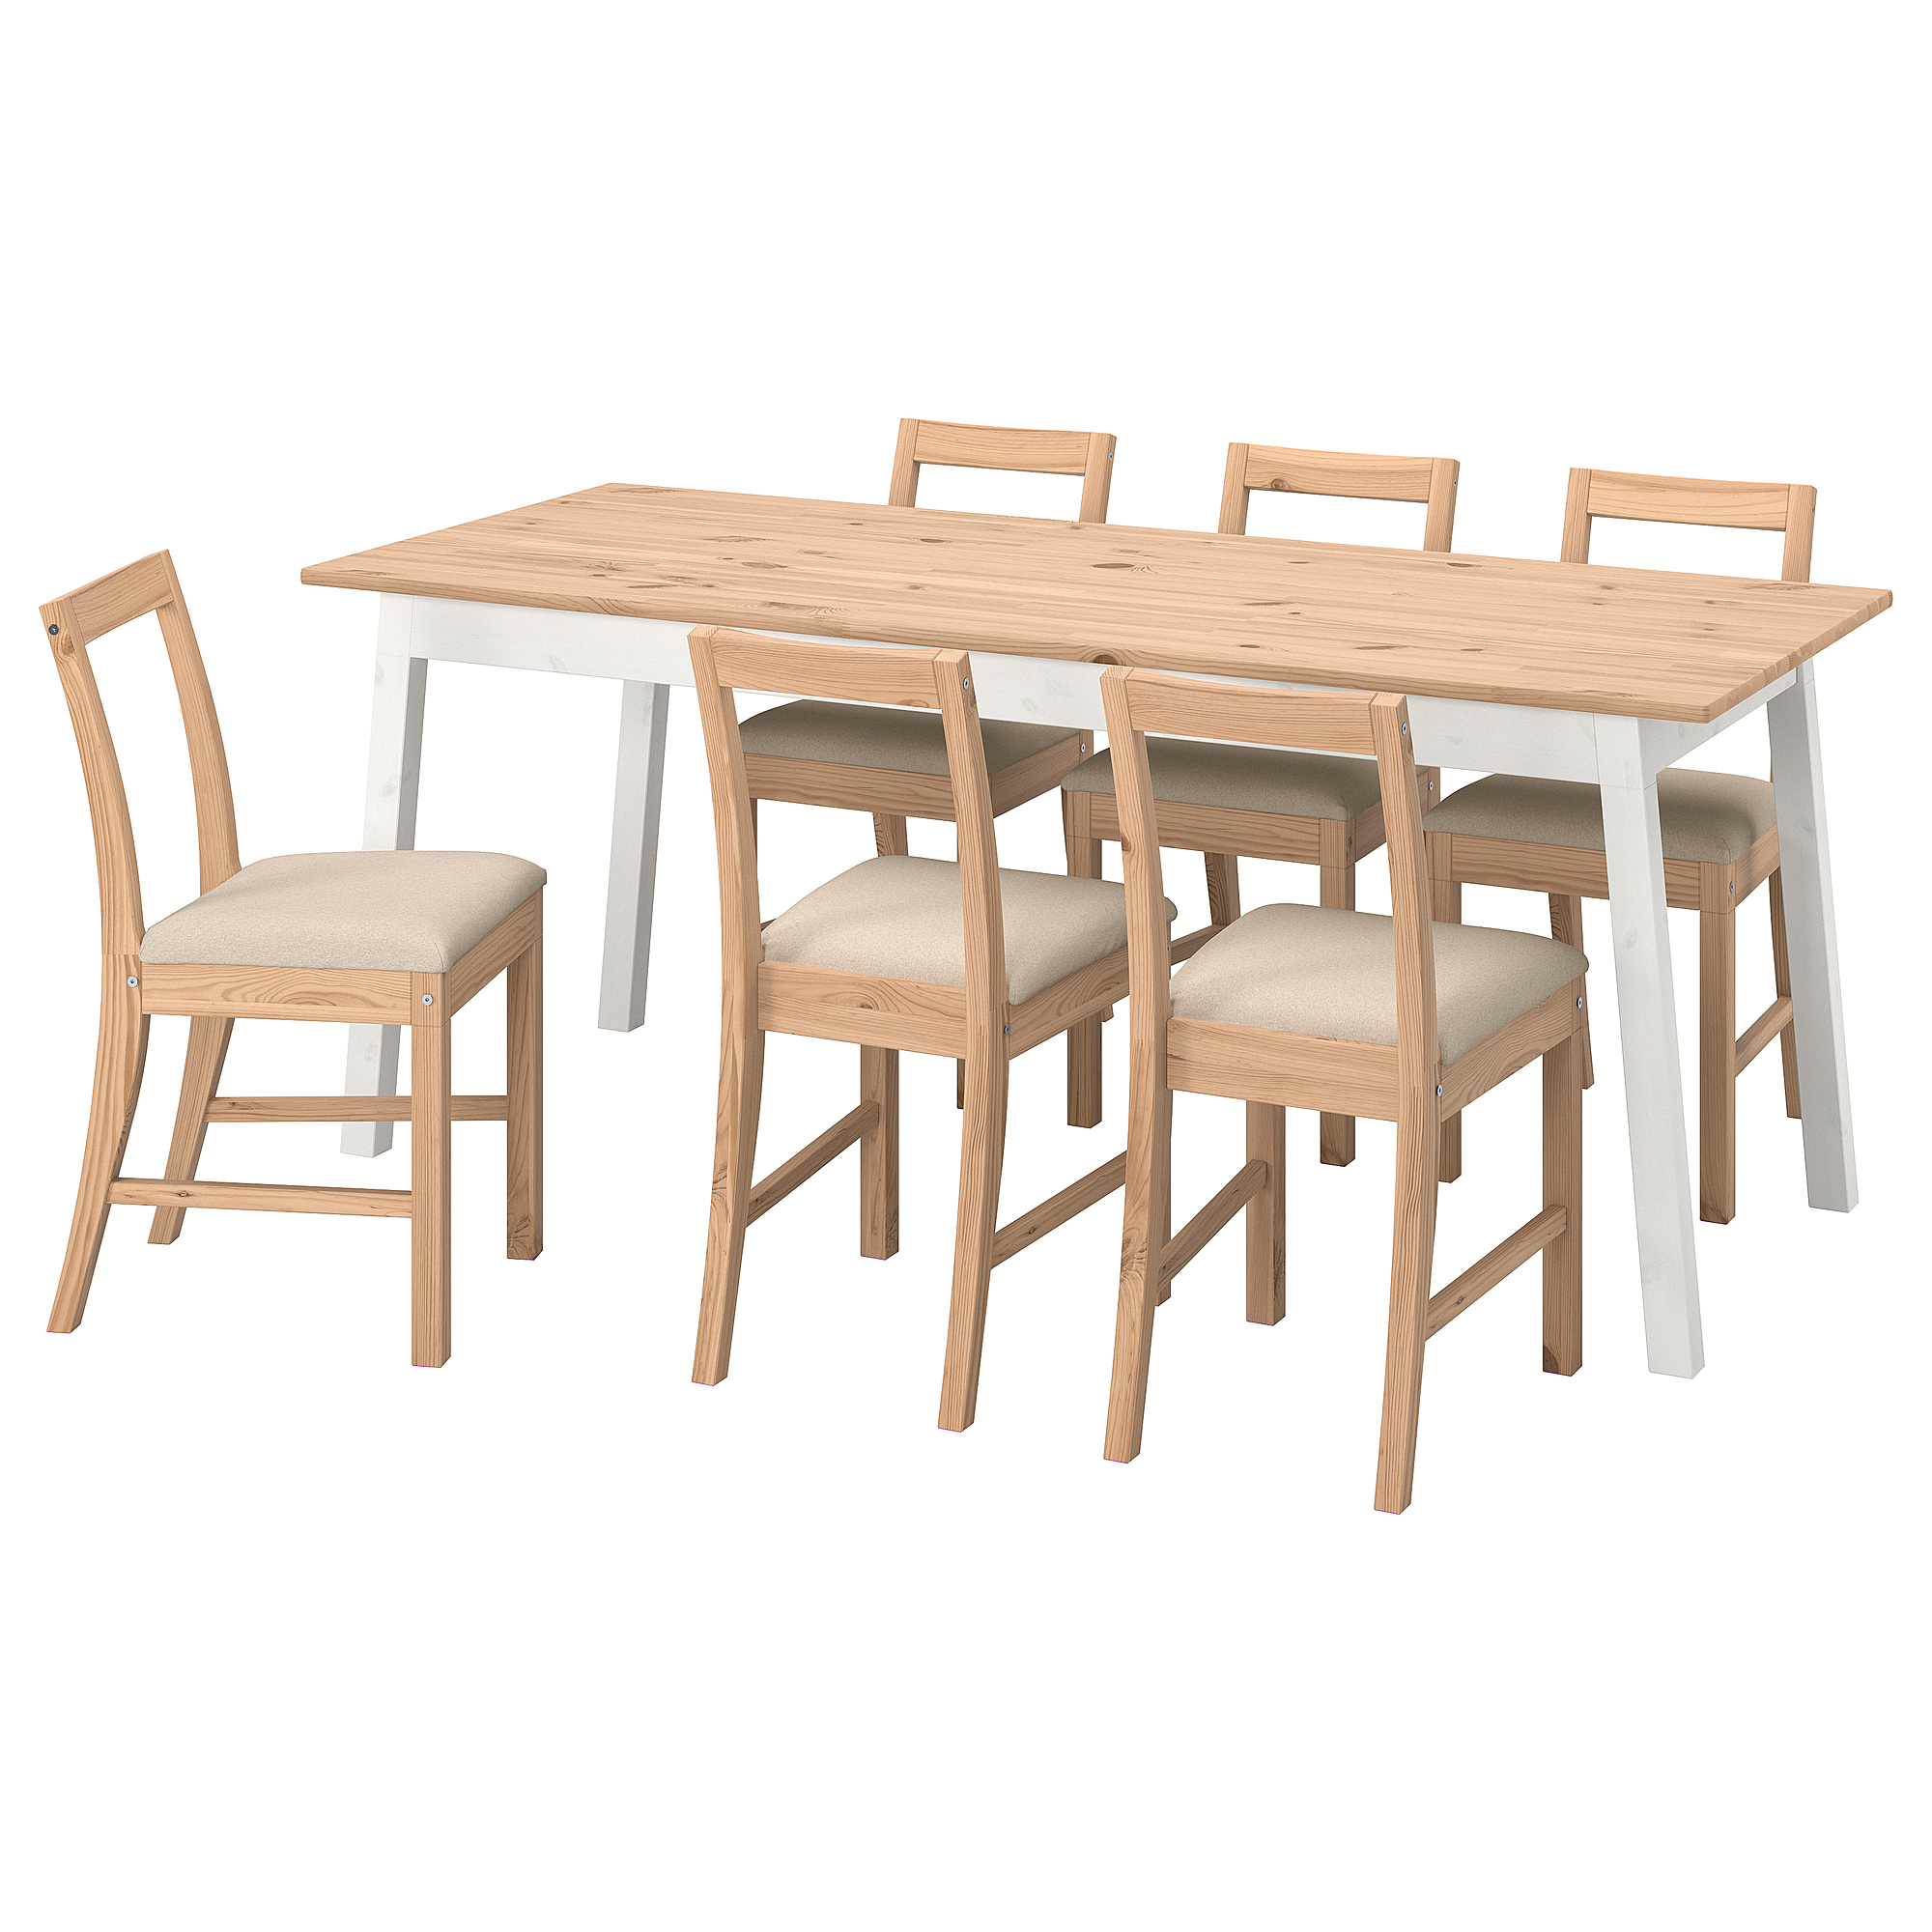 PINNTORP/PINNTORP table and 6 chairs